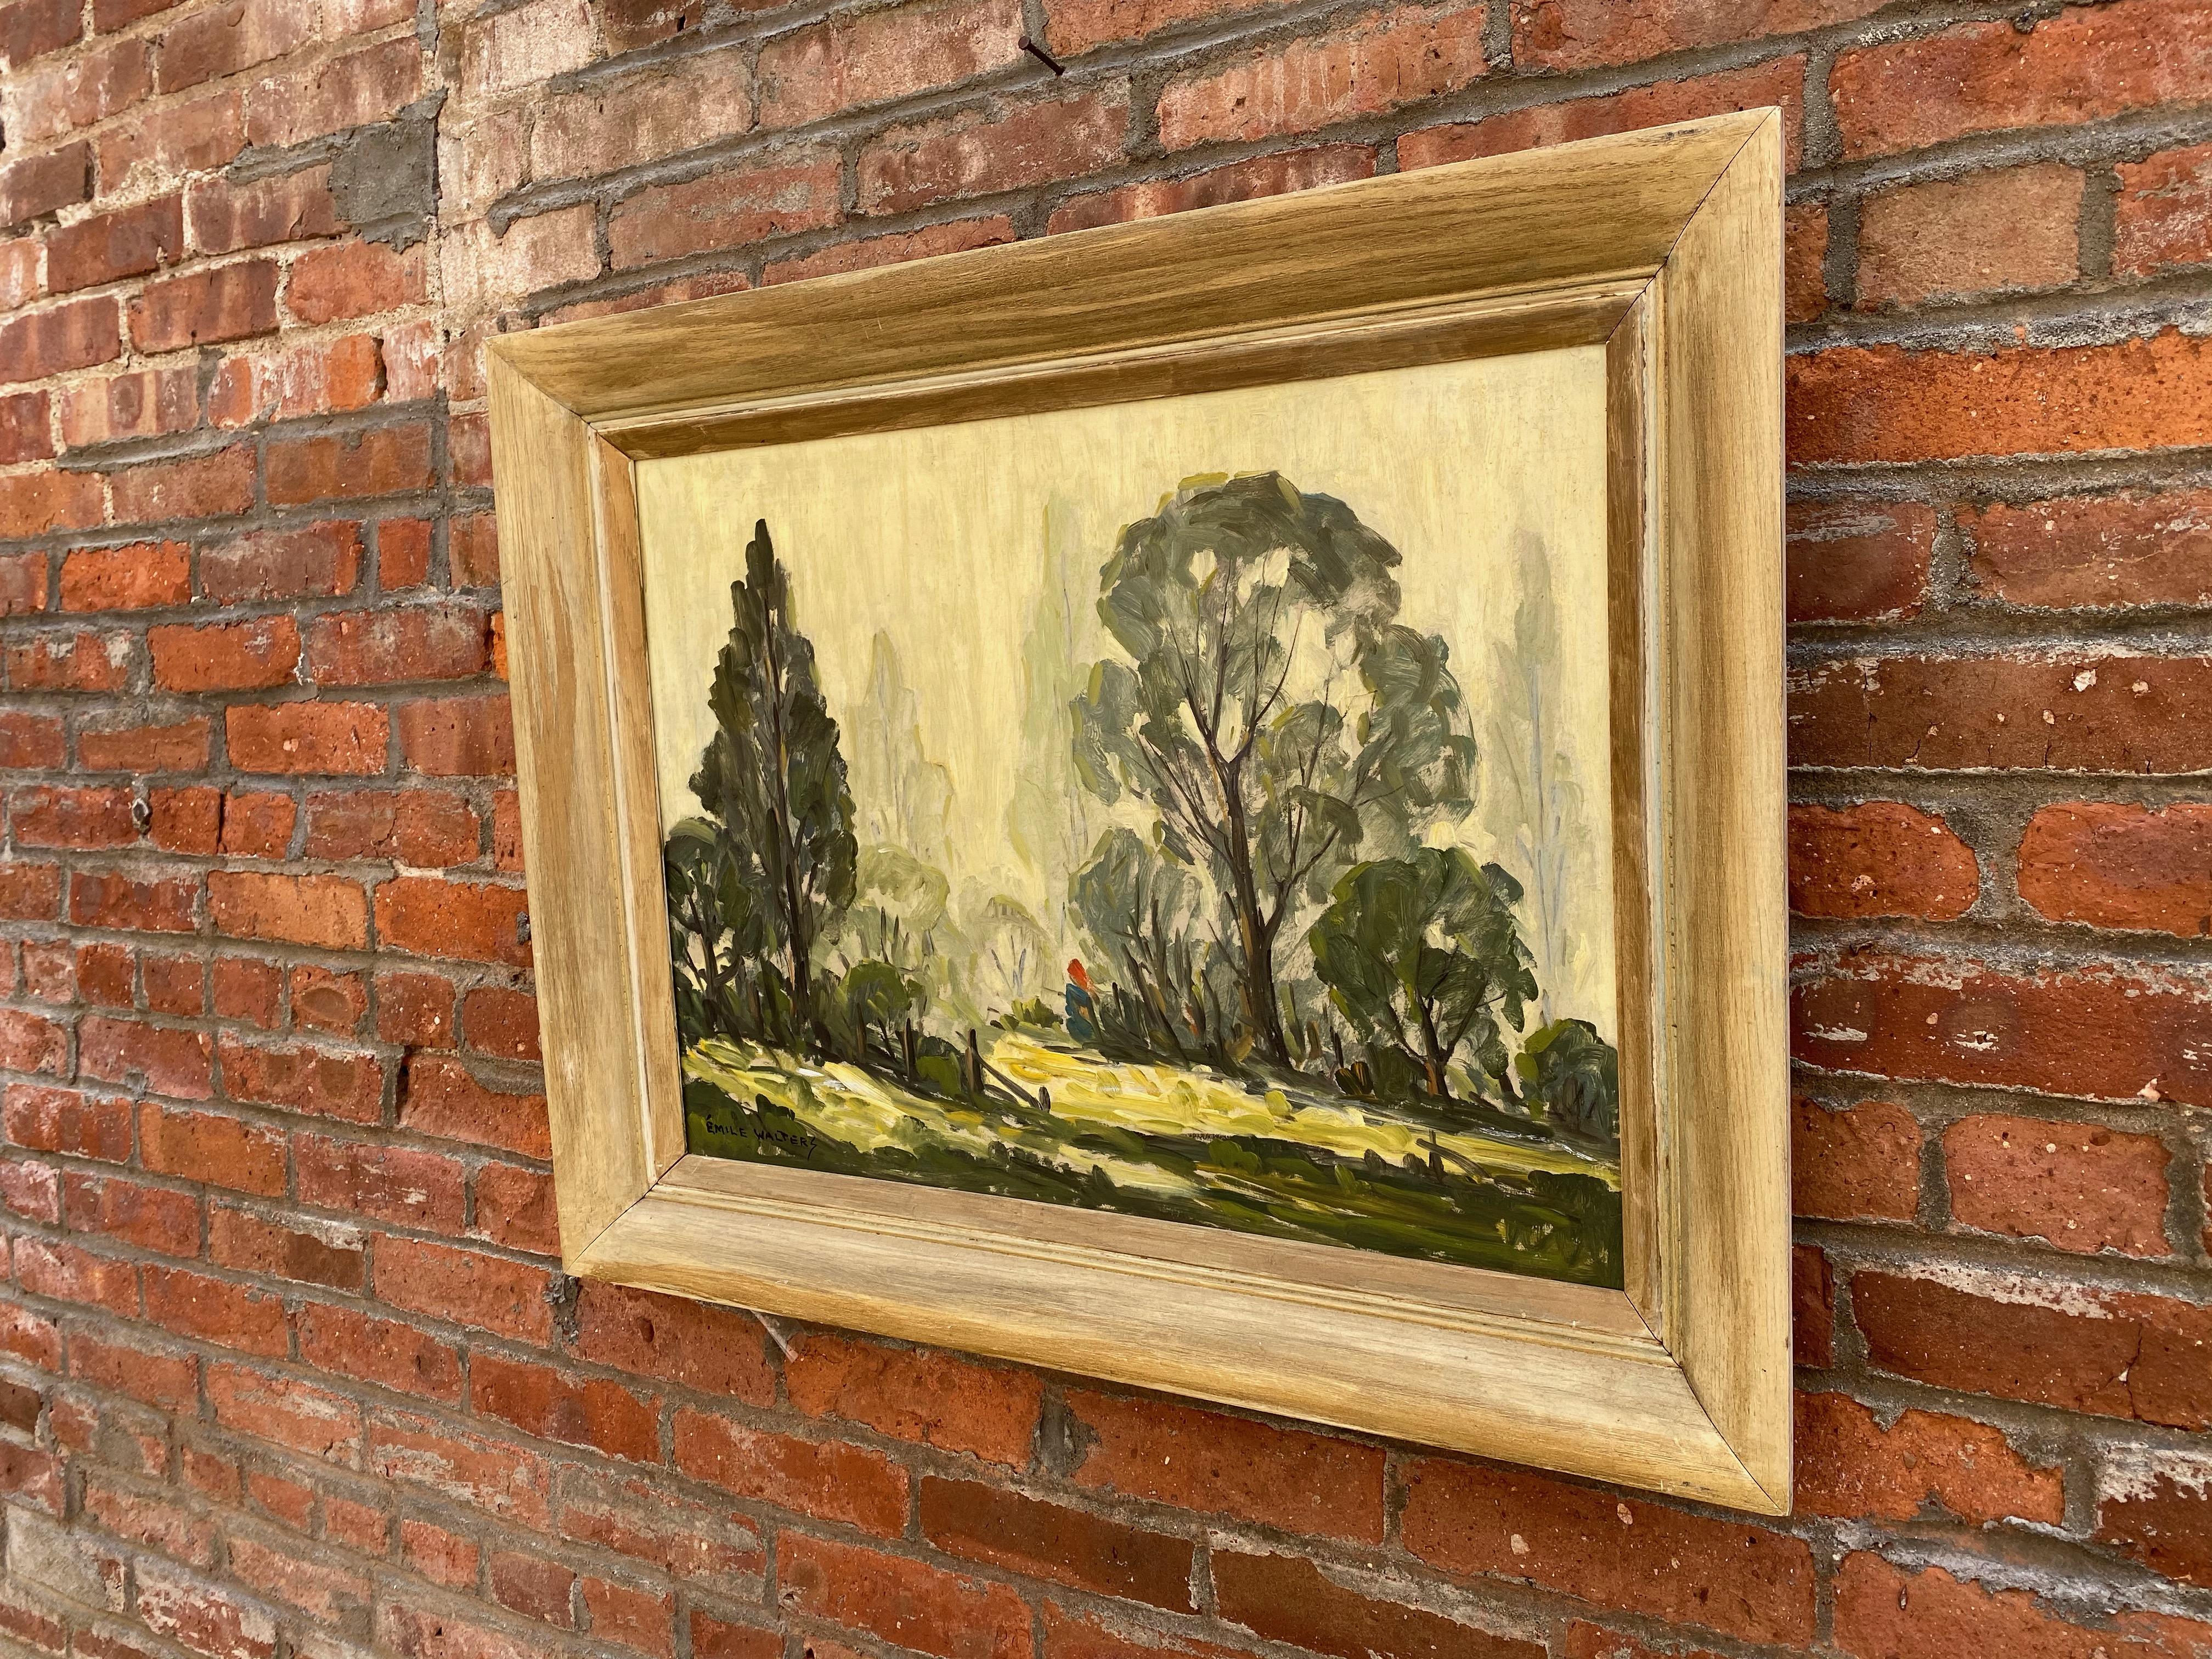 A wonderful example of Emile Walters (1893-1977) impressionistic style of the 1930s- through to the end of his career. Oil on masonite board. Signed lower left, Emile Walters. Very good original condition with no visible issues, paint loss, crazing,